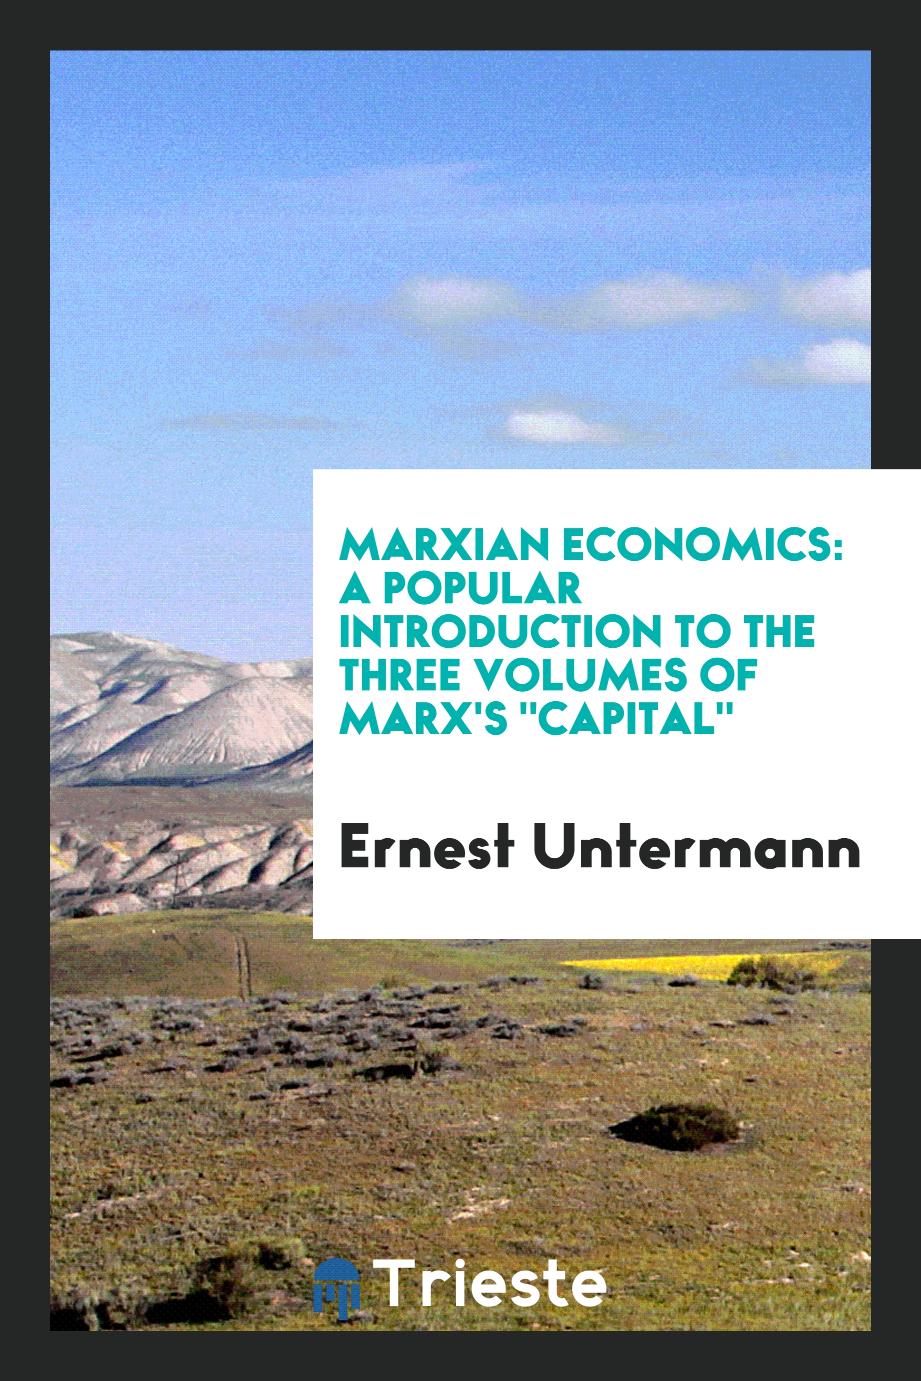 Marxian Economics: A Popular Introduction to the Three Volumes of Marx's "Capital"